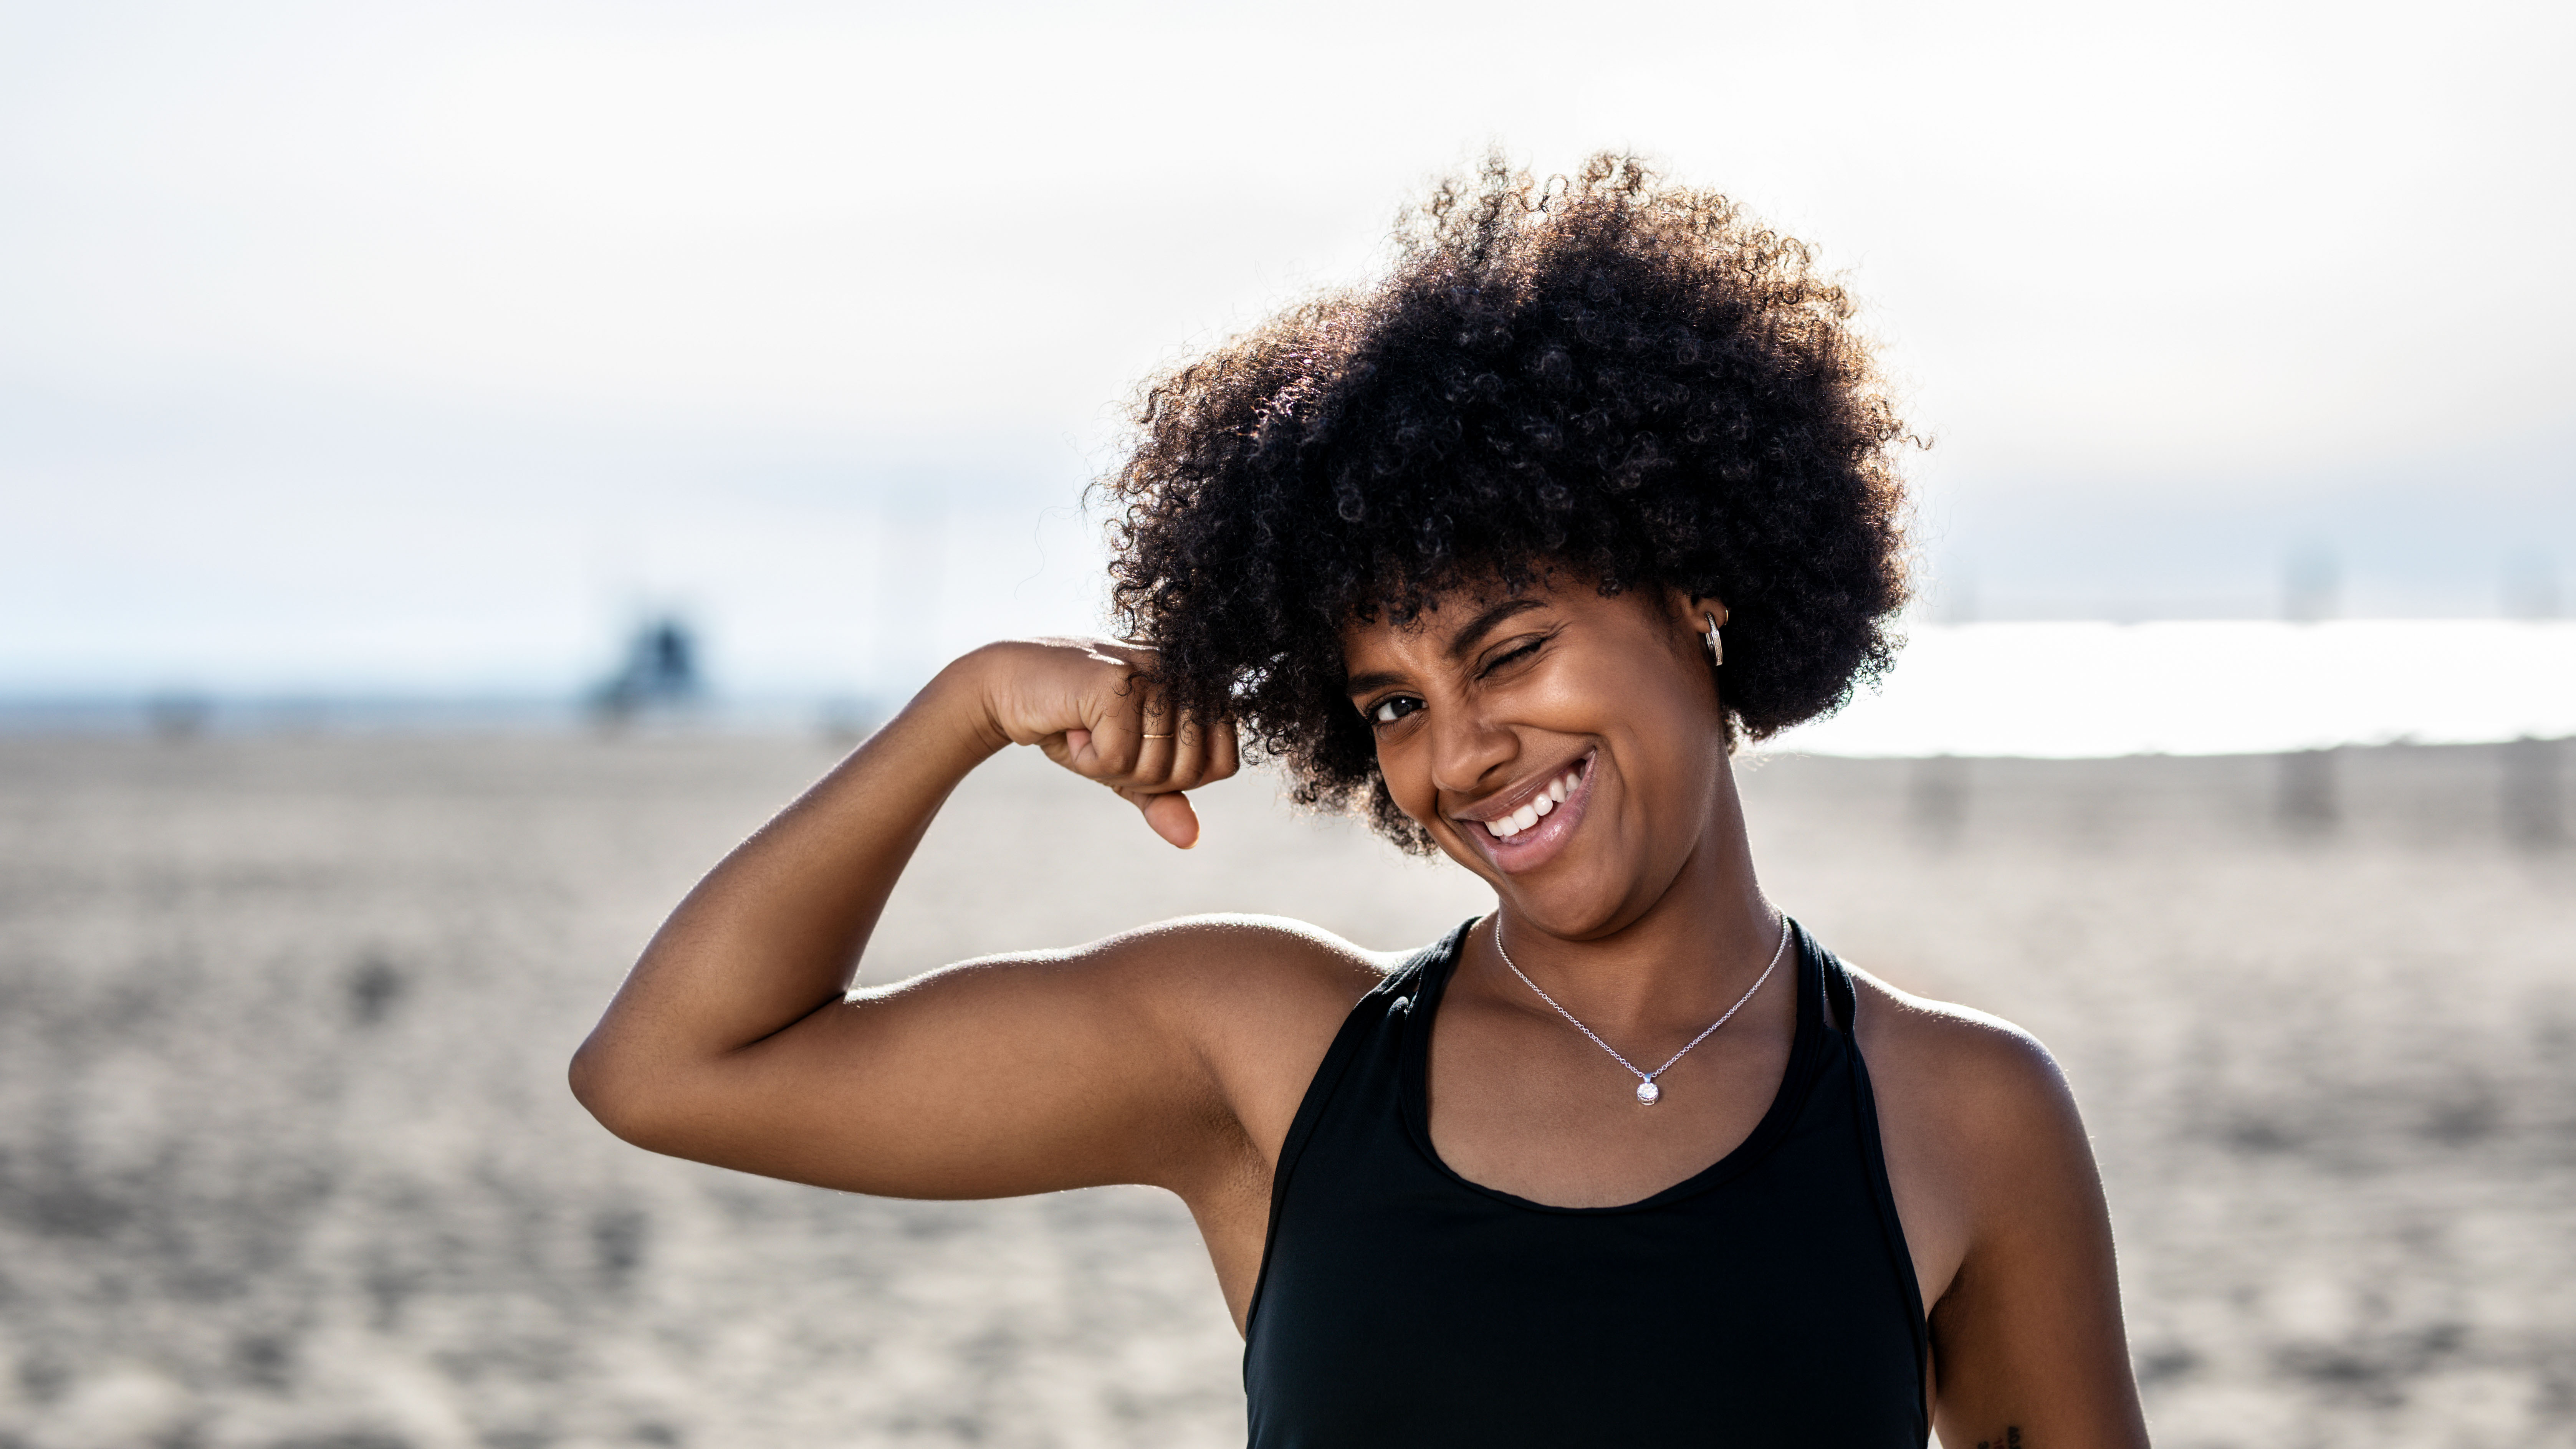 Young woman flexing bicep